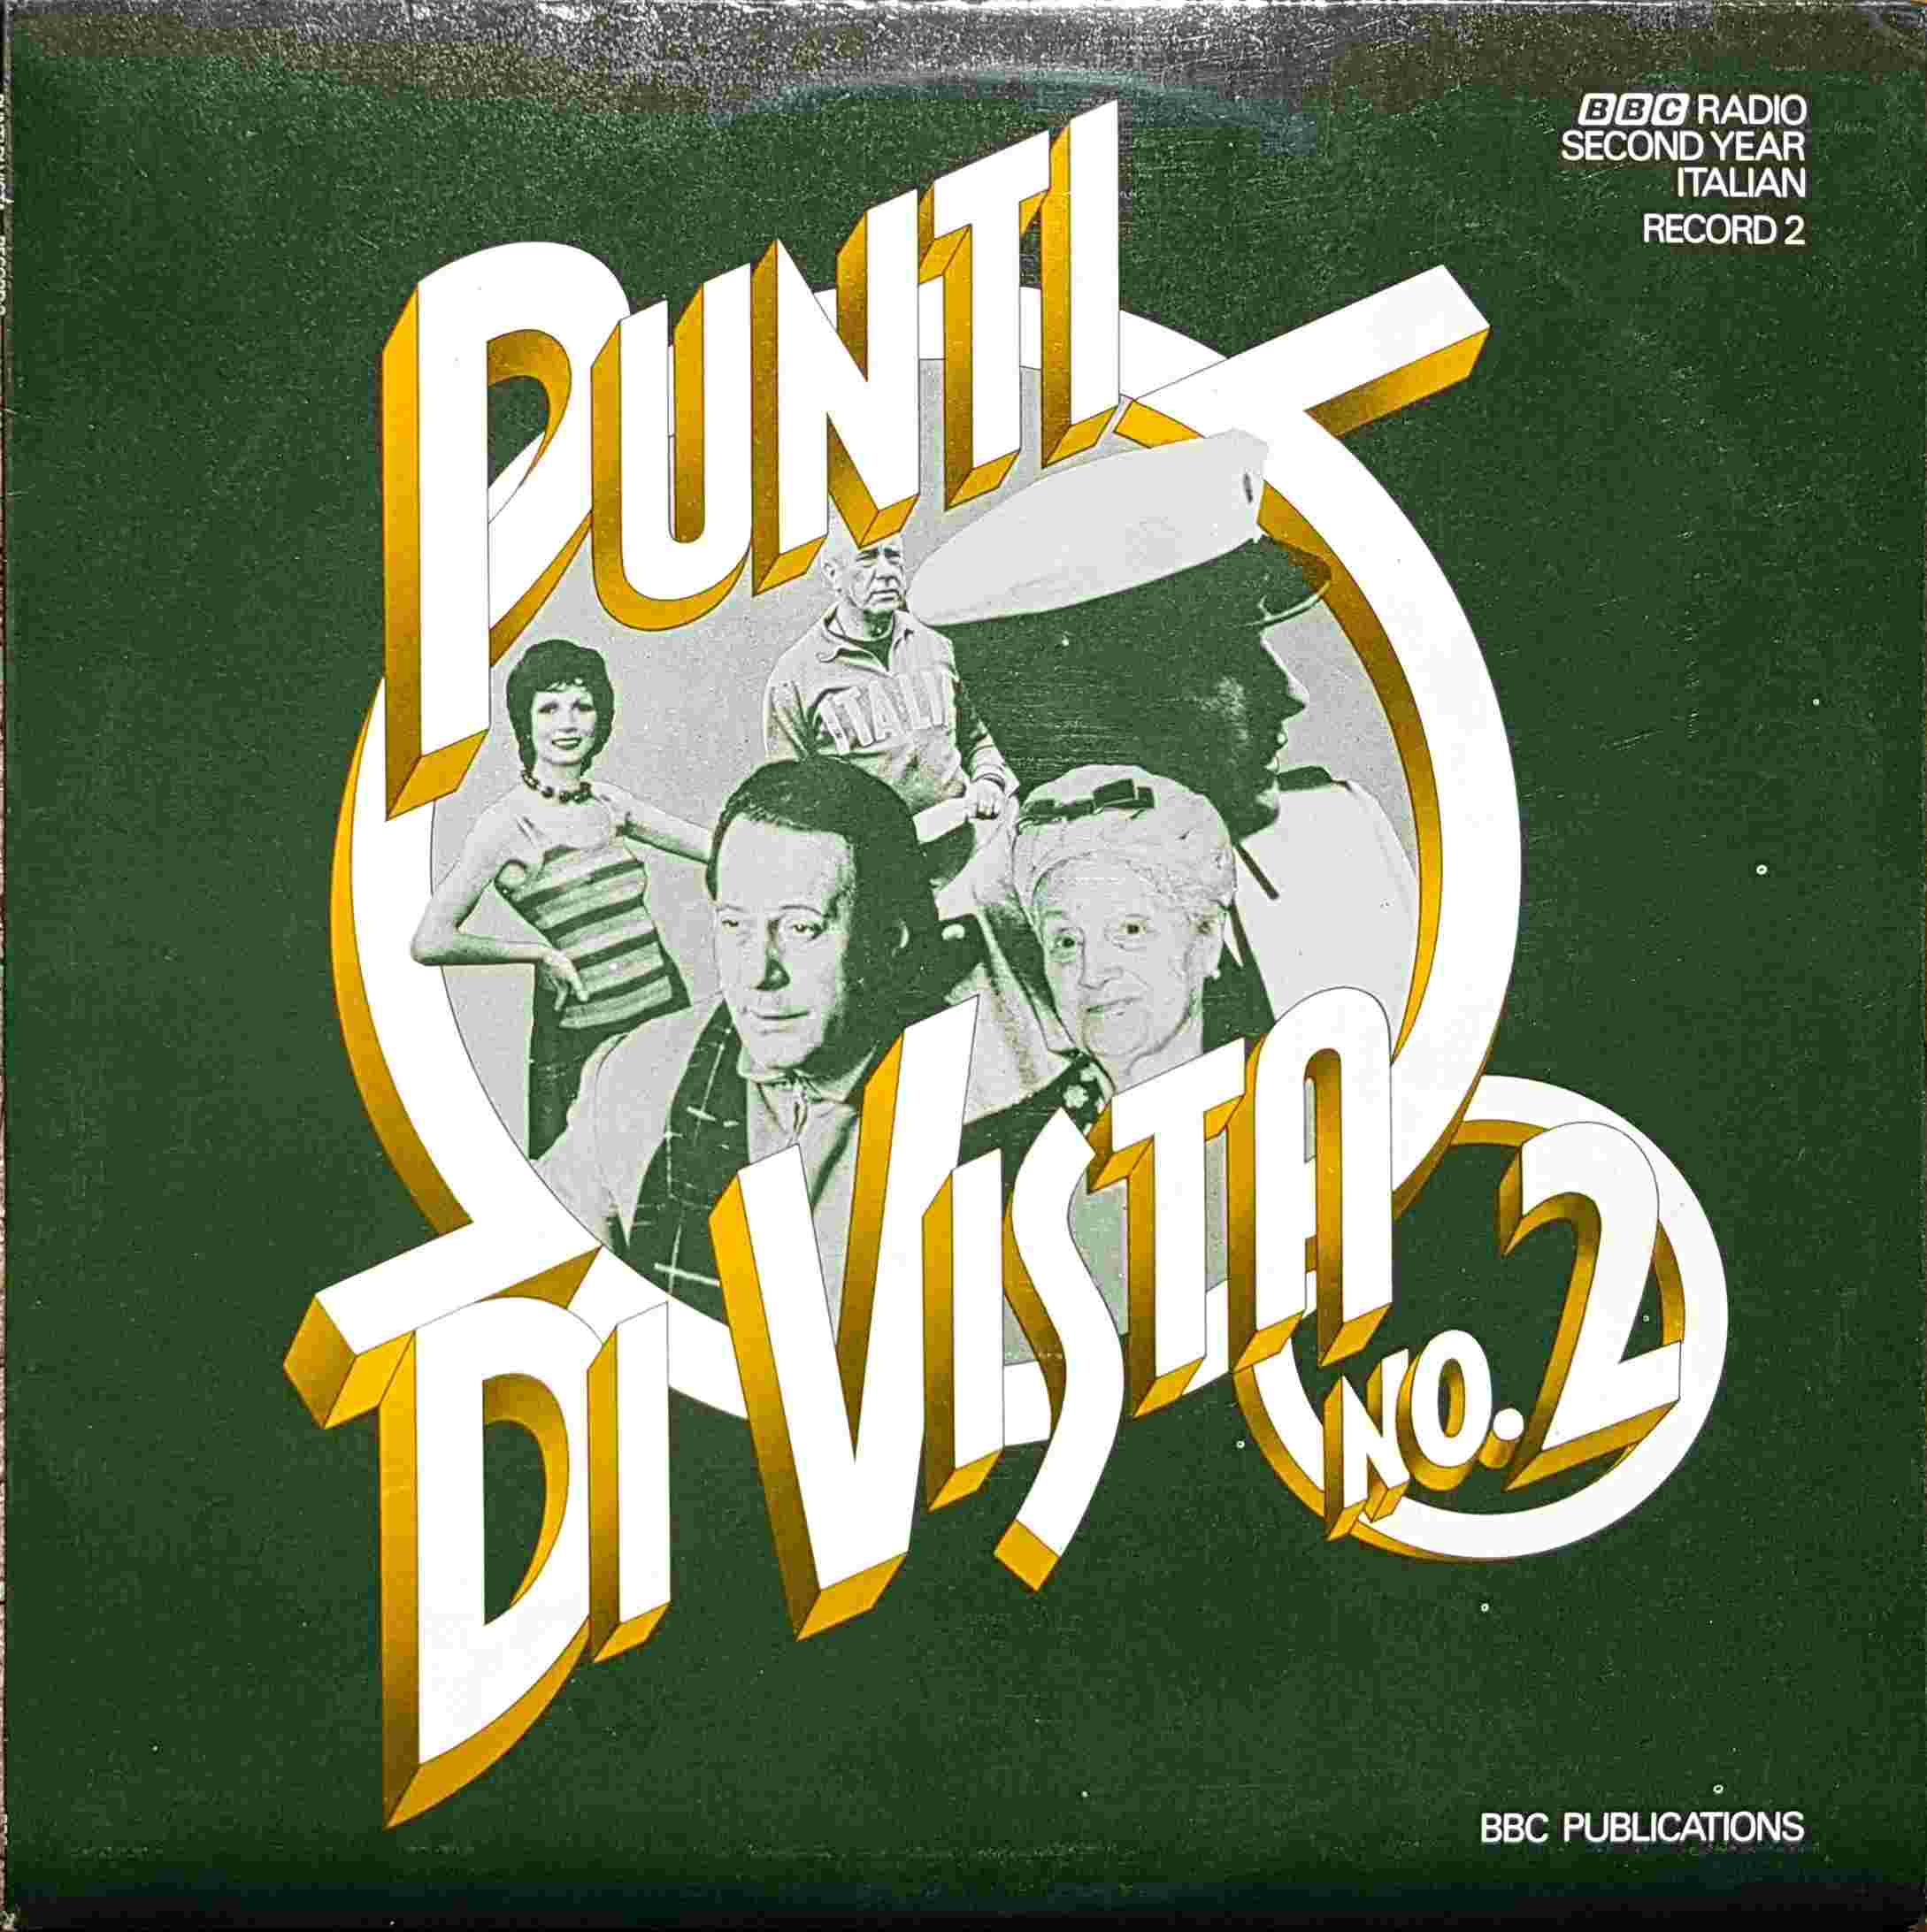 Picture of OP 195/196 Punti di vista - BBC Radio second year Italian - Record 1 - Programmes 11 - 20 by artist Various from the BBC albums - Records and Tapes library